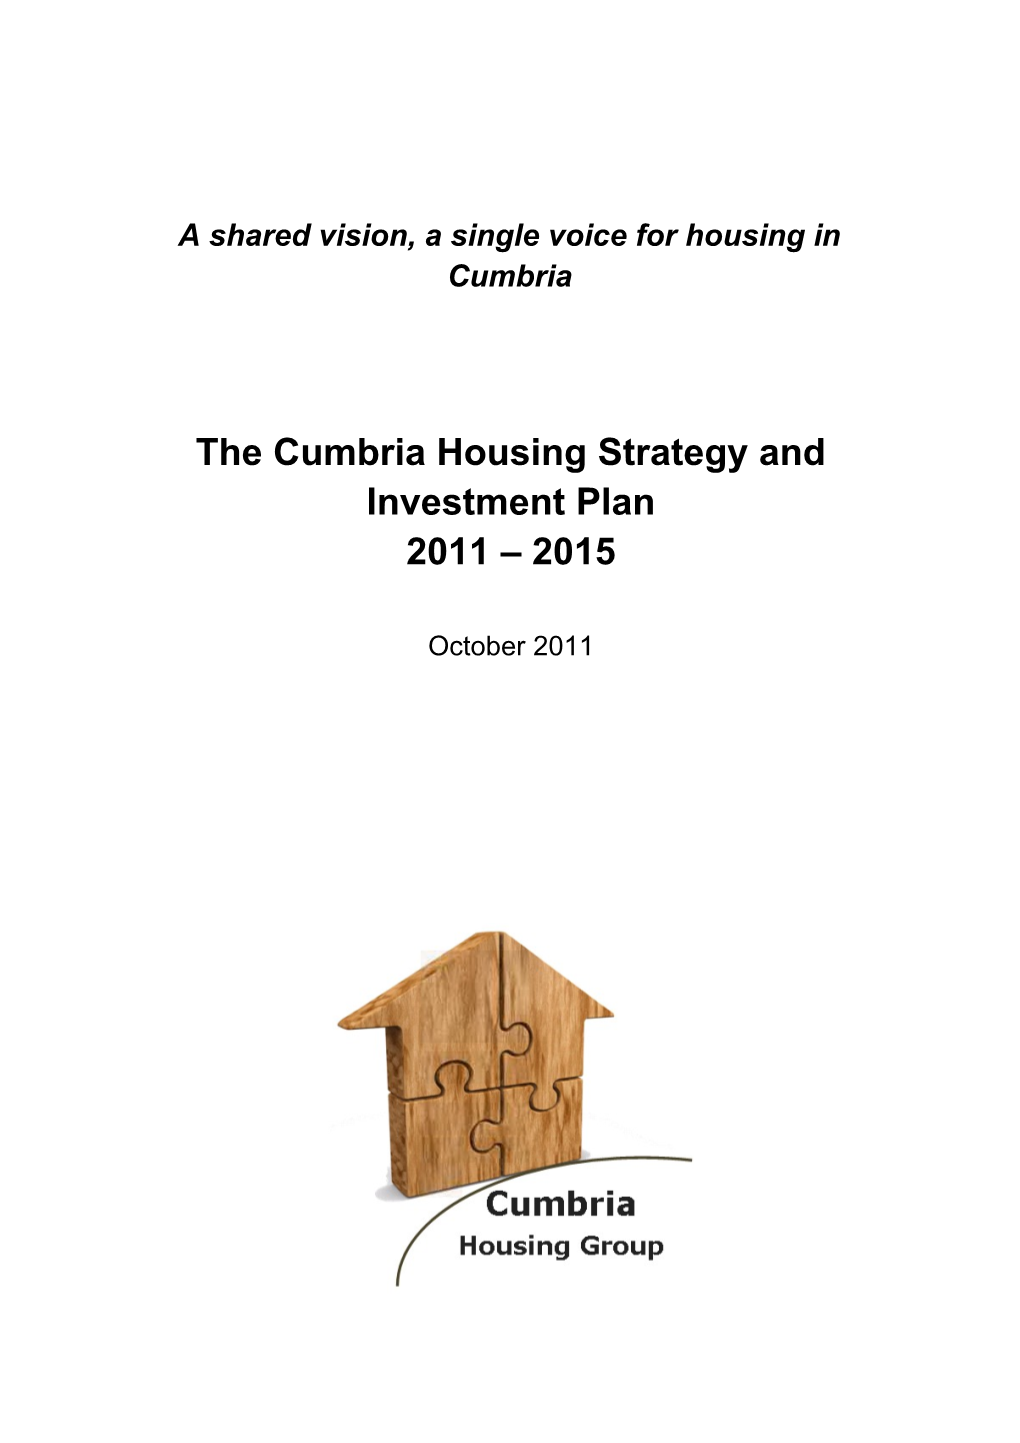 A Shared Vision, a Single Voice for Housing in Cumbria